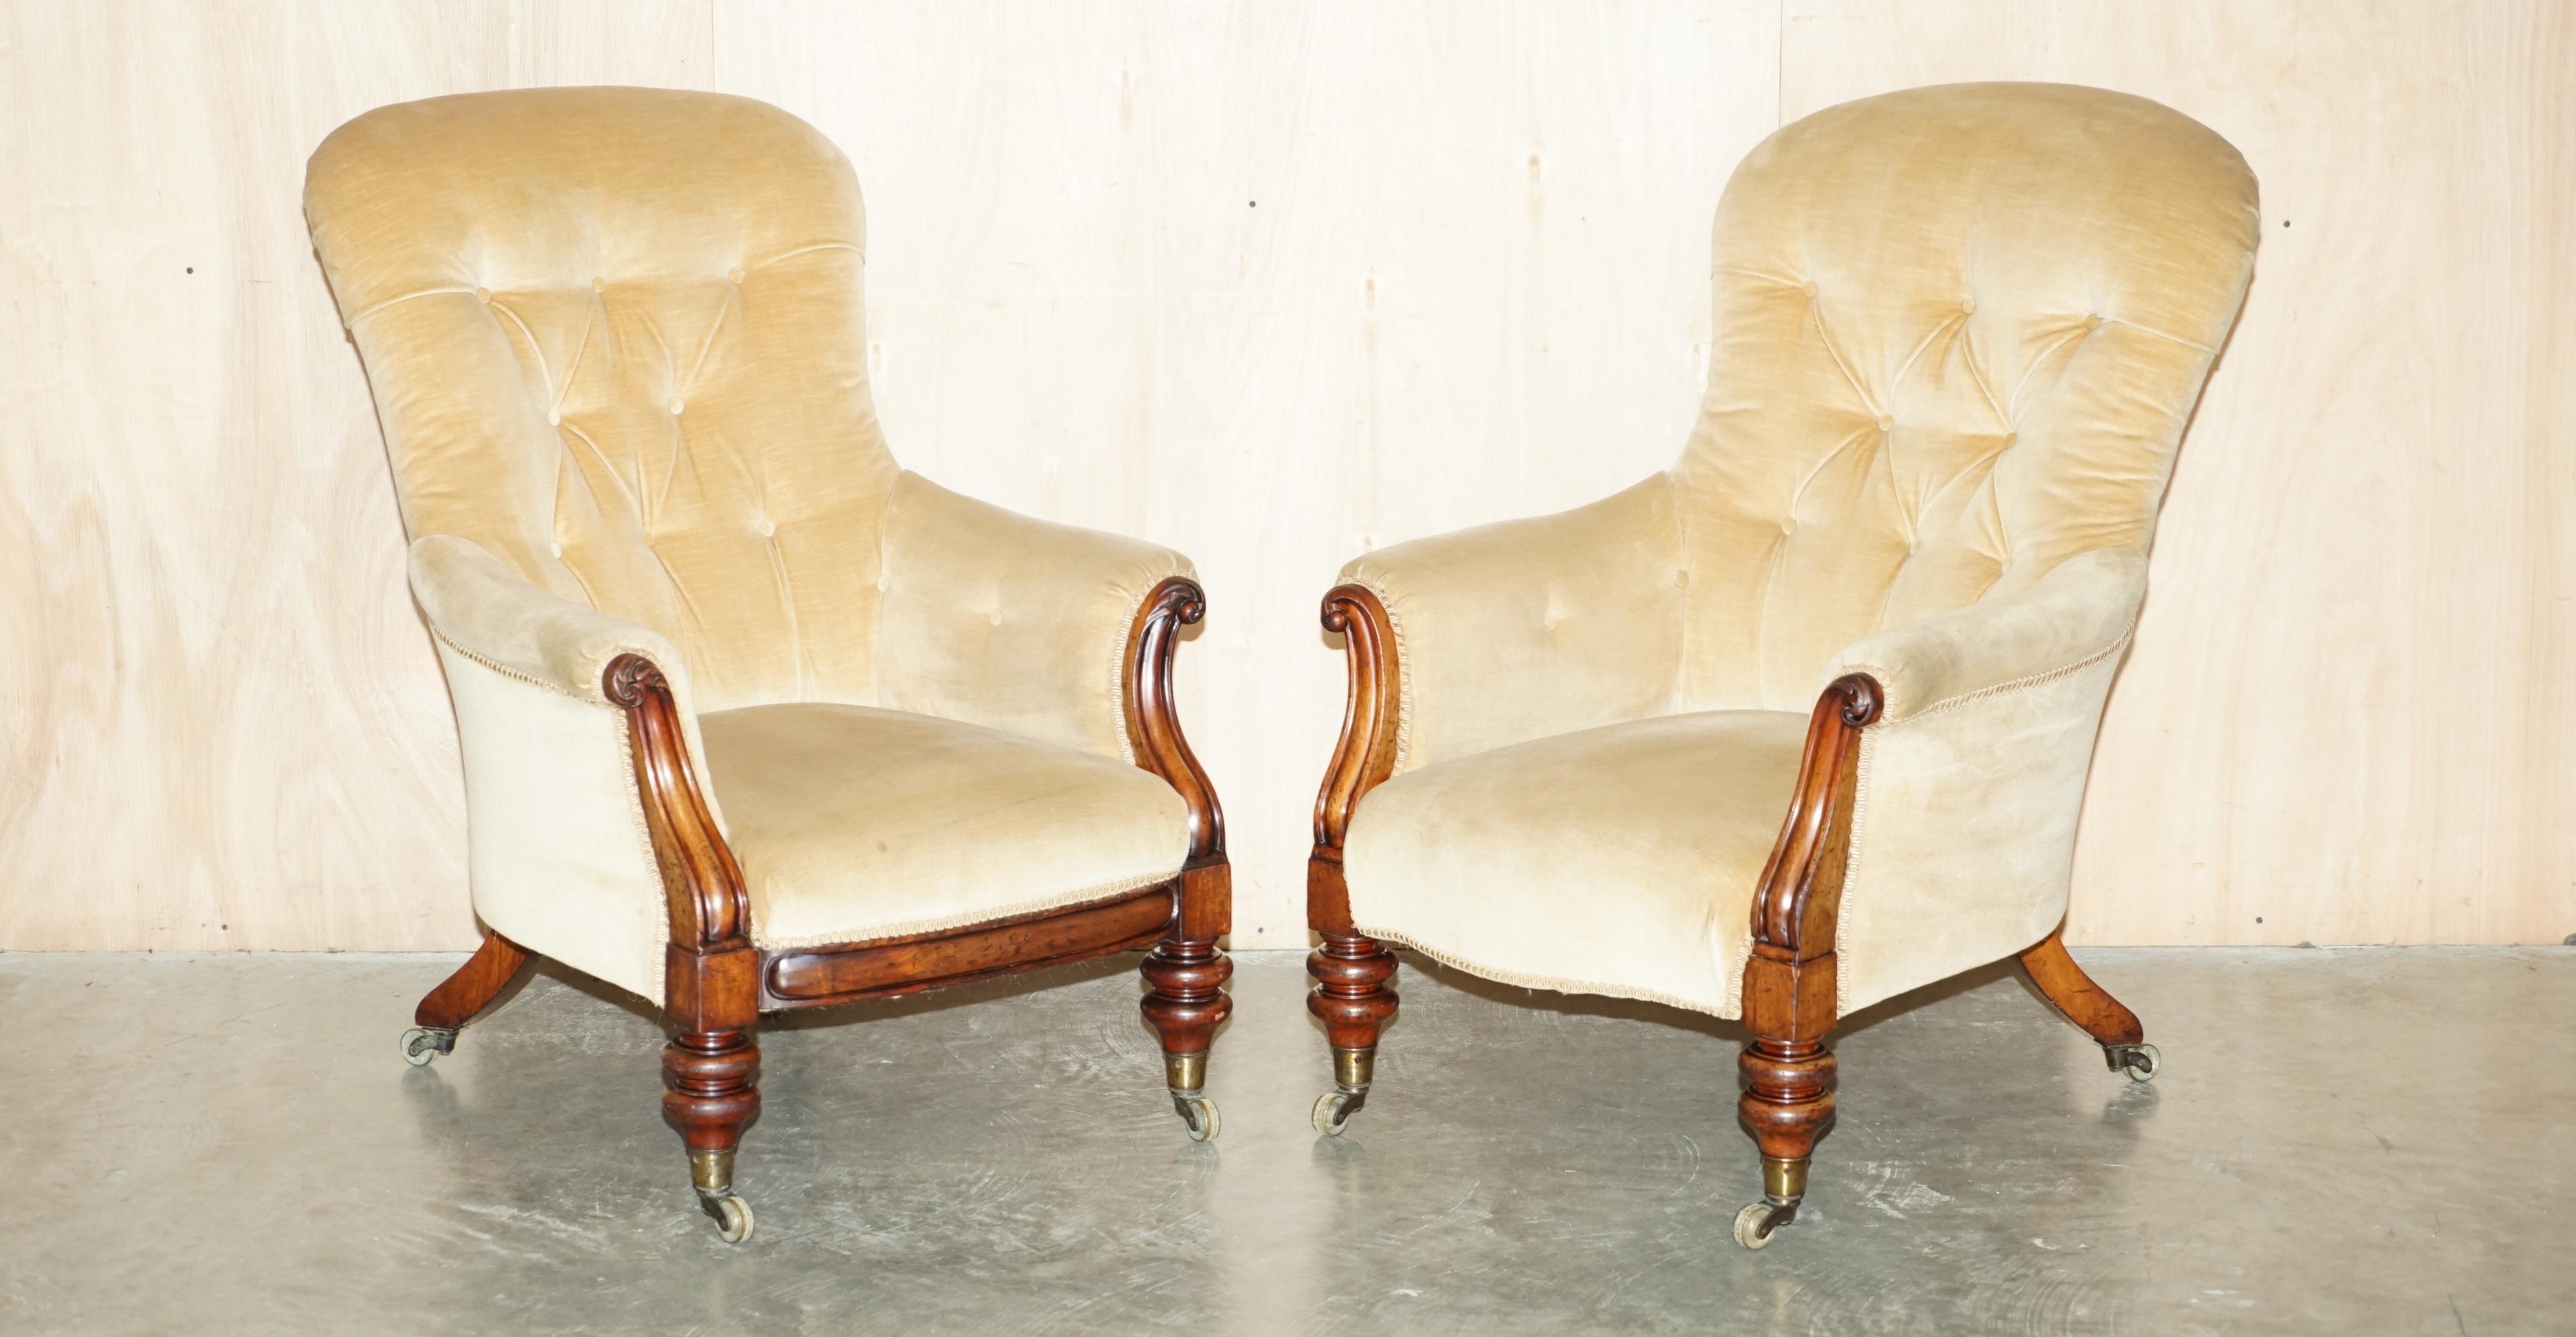 Hand-Crafted IMPORTANT PAIR OF ROYAL STAMPED JOHNSTONE & JEANES CROWN ESTATE MADE ARMCHAiRS For Sale